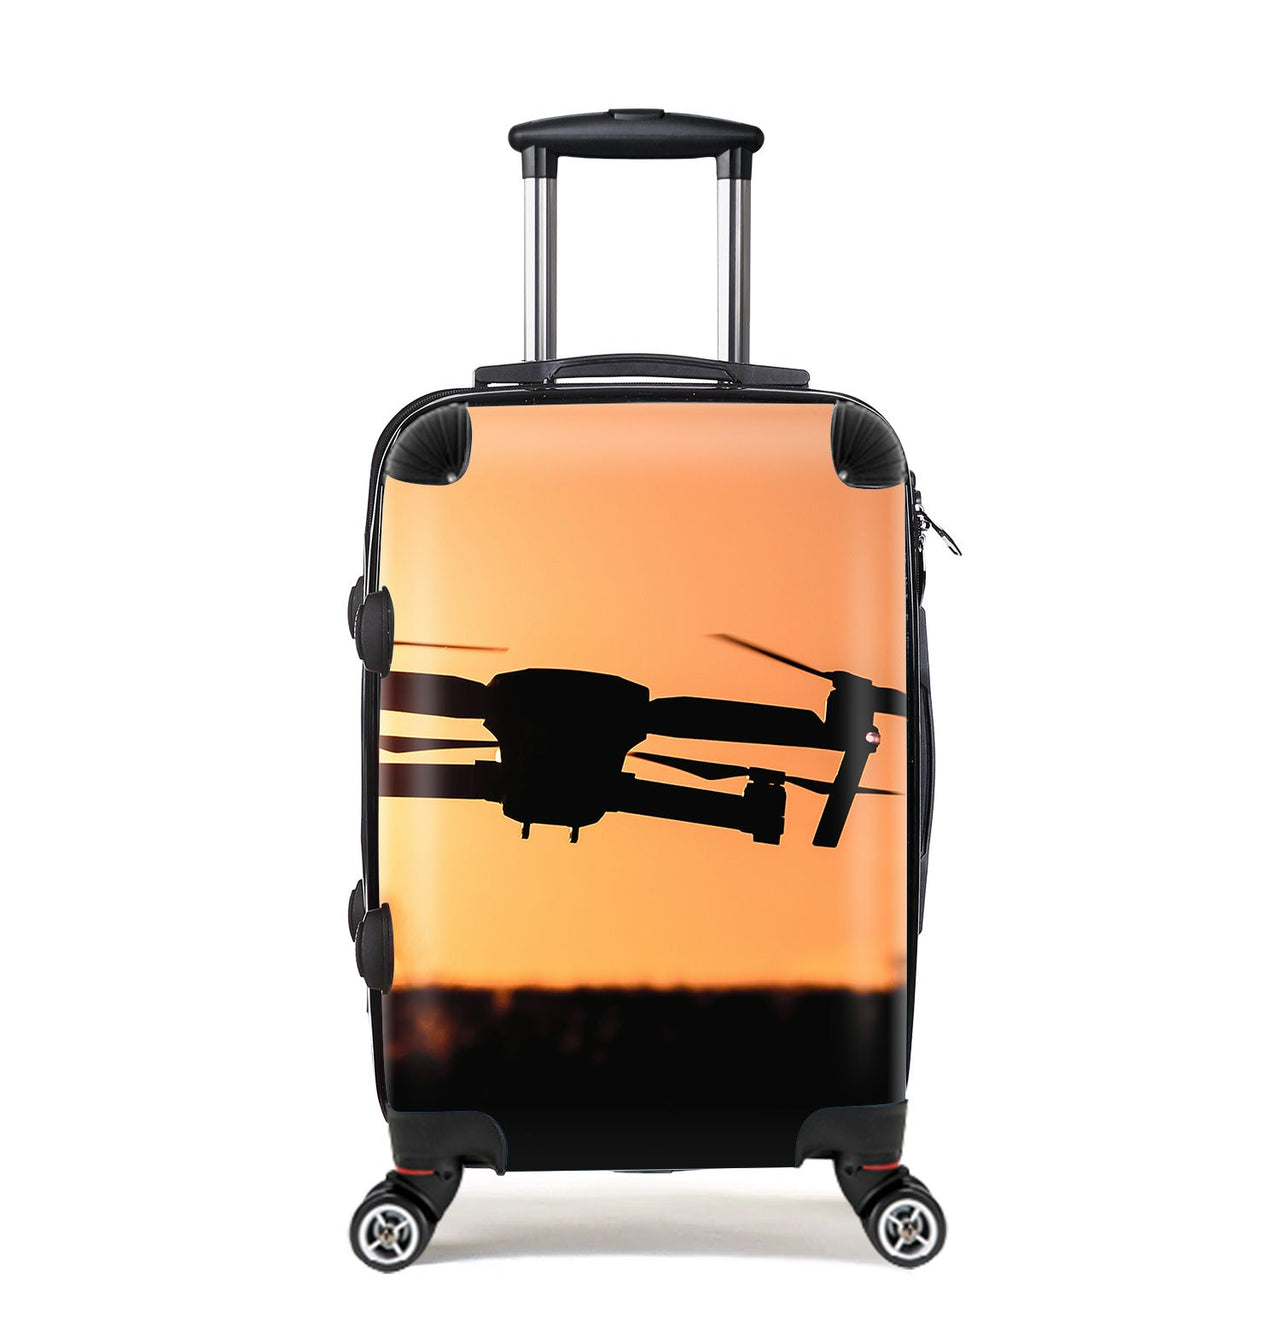 Amazing Drone in Sunset Designed Cabin Size Luggages